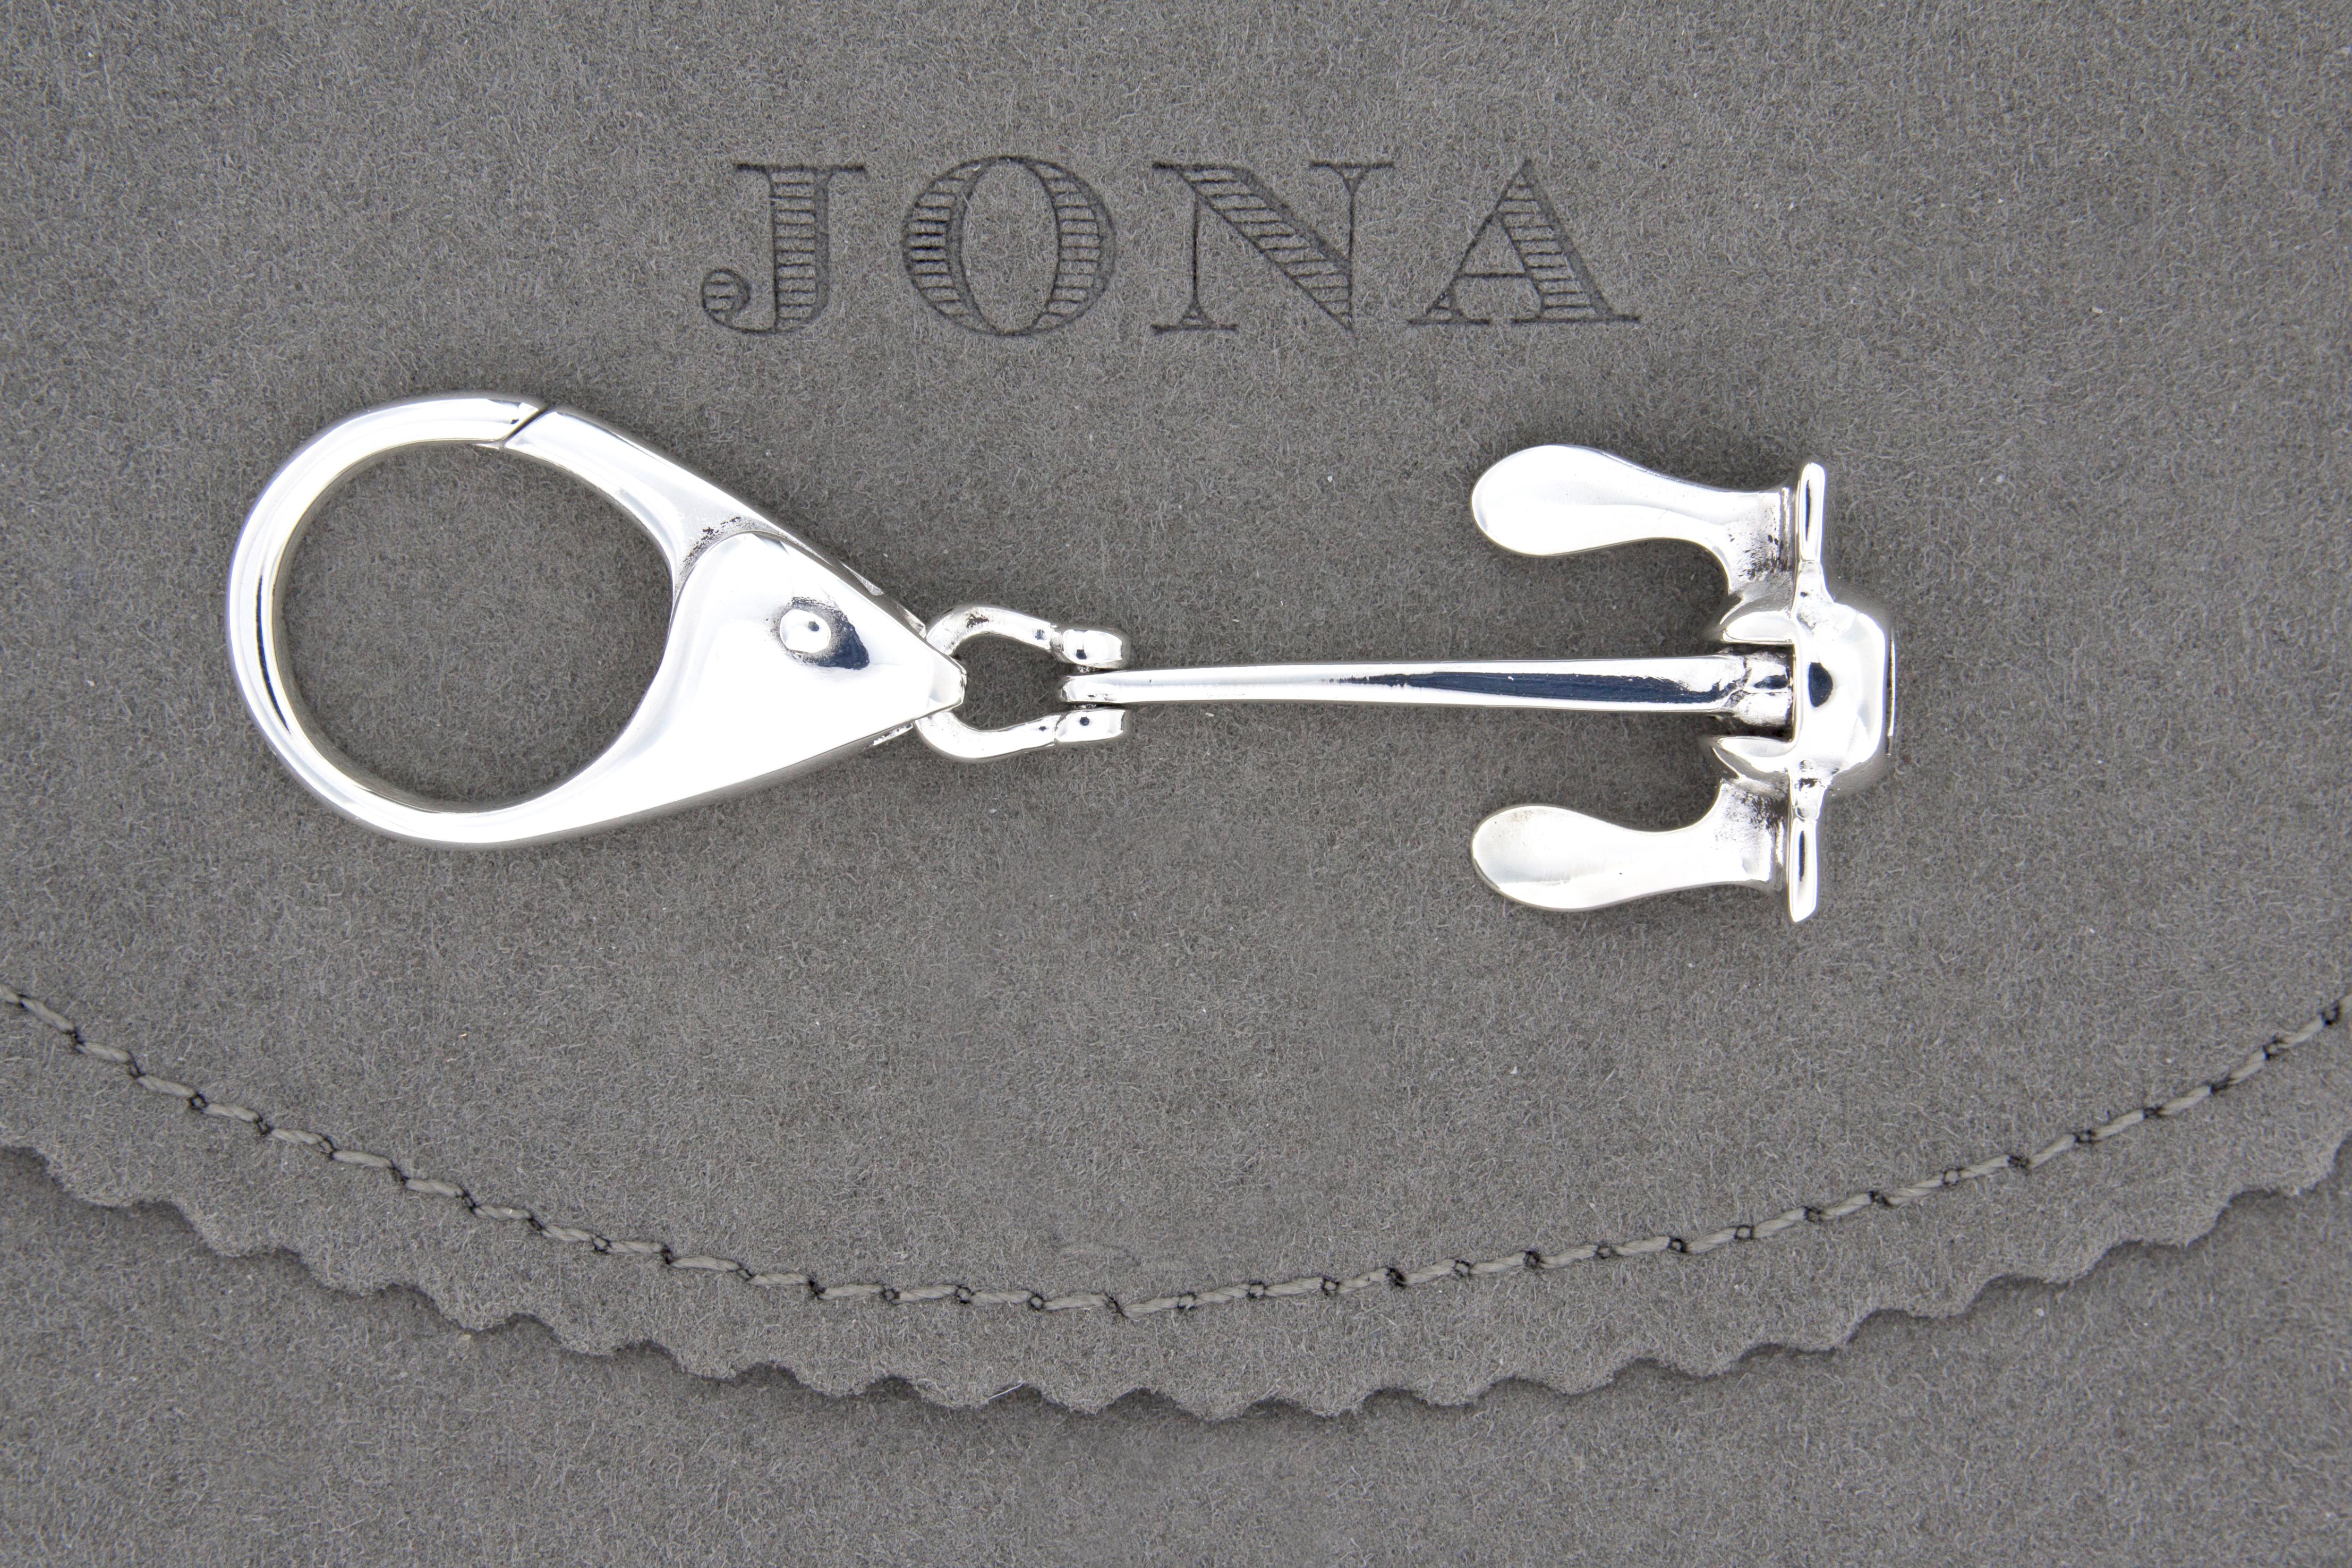 Jona design collection, hand crafted in Italy, rhodium plated Sterling Silver Anchor key holder.
Anchor dimensions : L 1.82 in/ 46.37 mm x W 0.87 in/ 22.34 mm x Depth: 0.40 in/ 10.34 mm
All Jona jewelry is new and has never been previously owned or